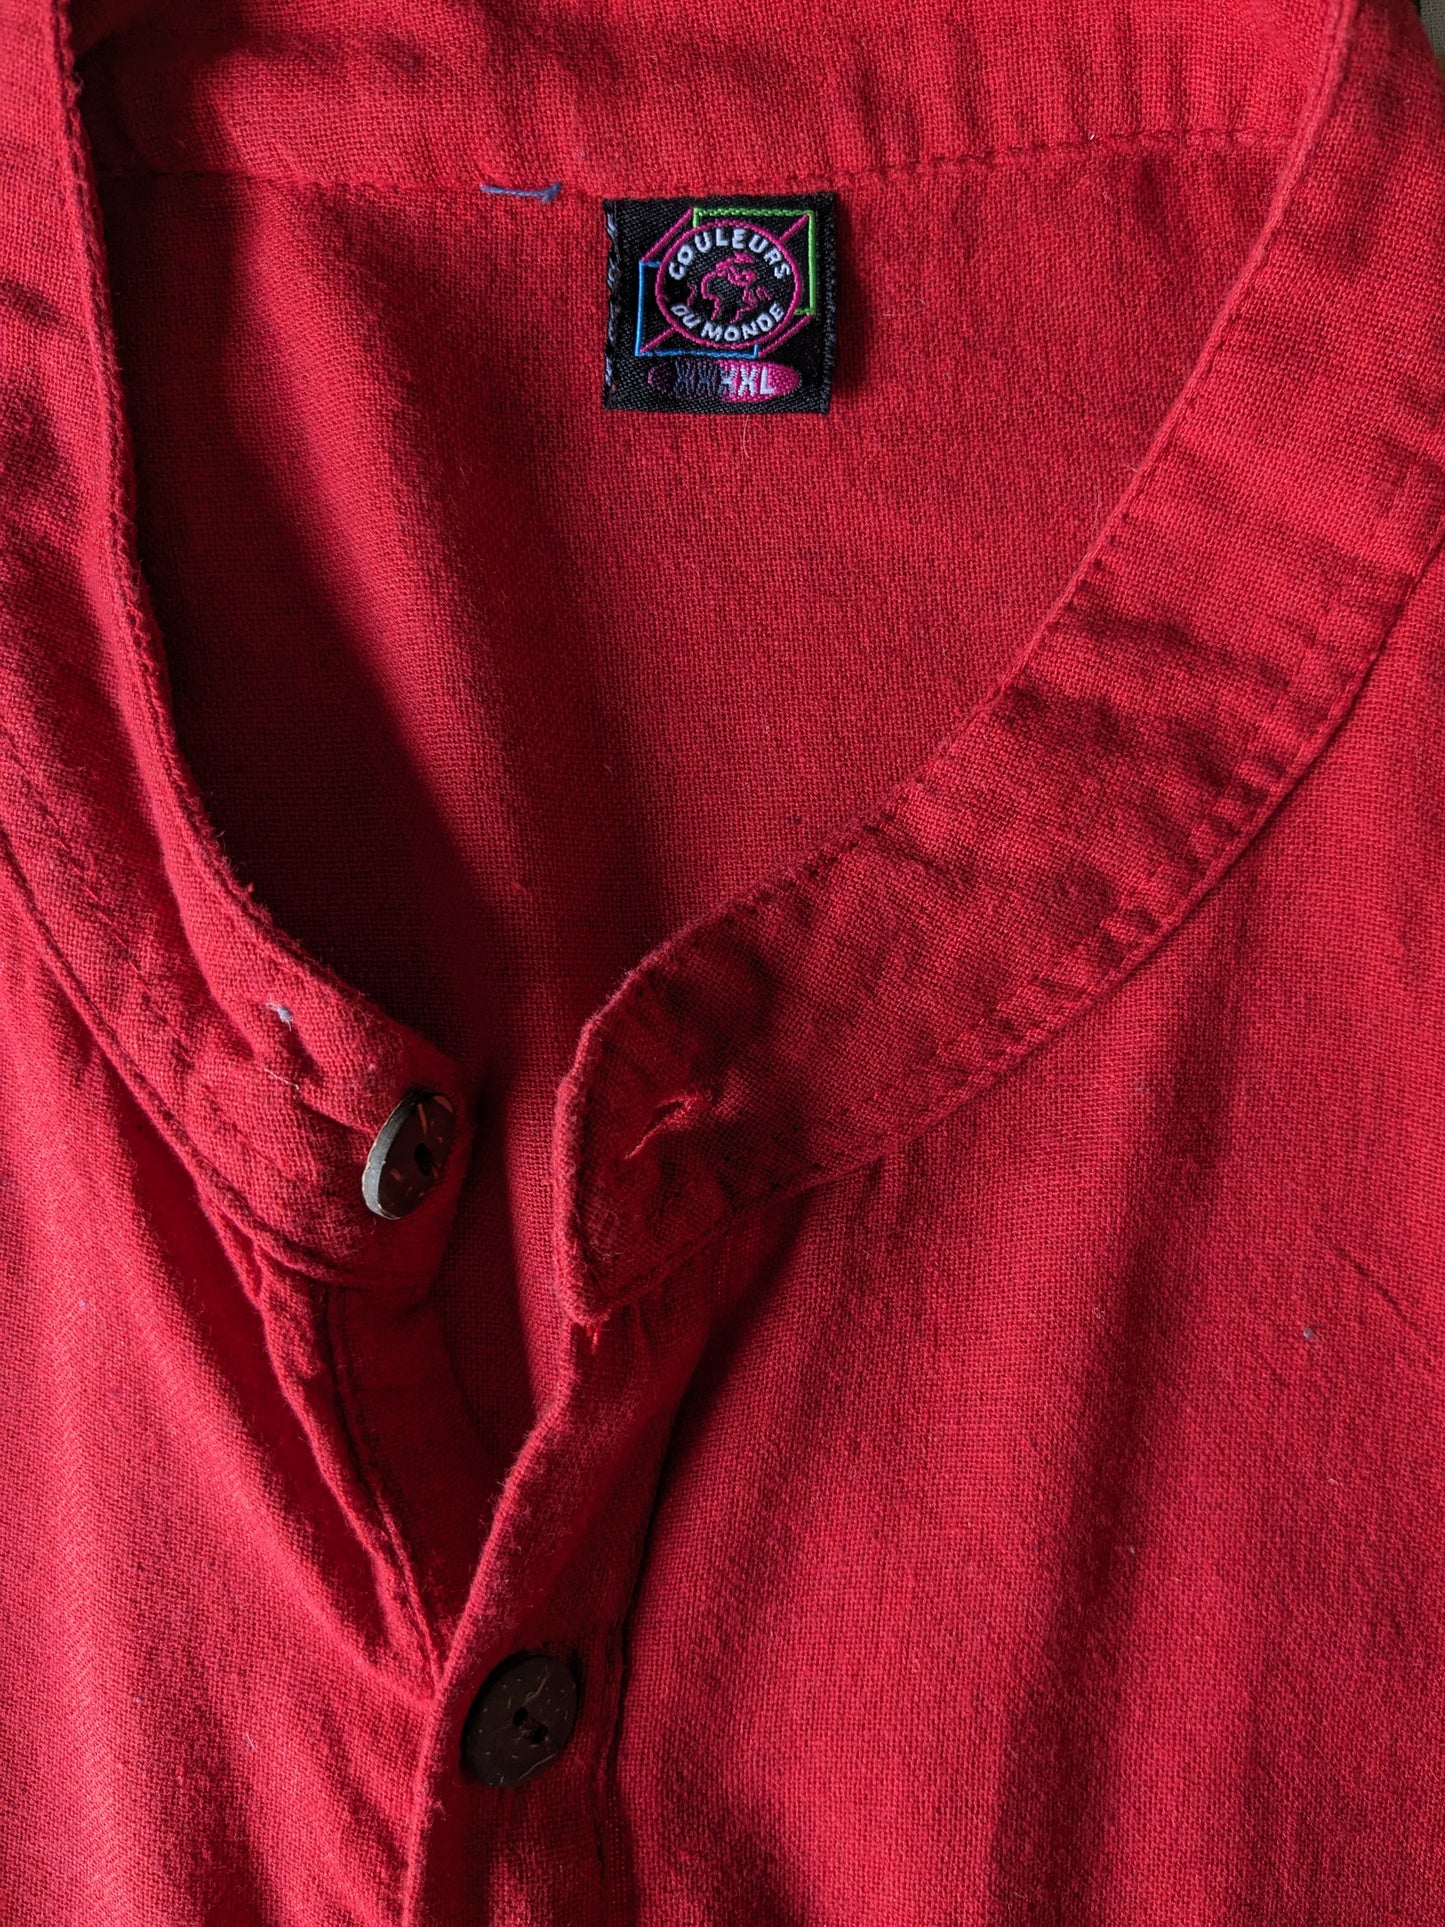 Vintage Couleurs du Monde Shirt with Mao / Farmer / Standing Collar and 1 Bag. Colored red. Size 2XL / XXL.